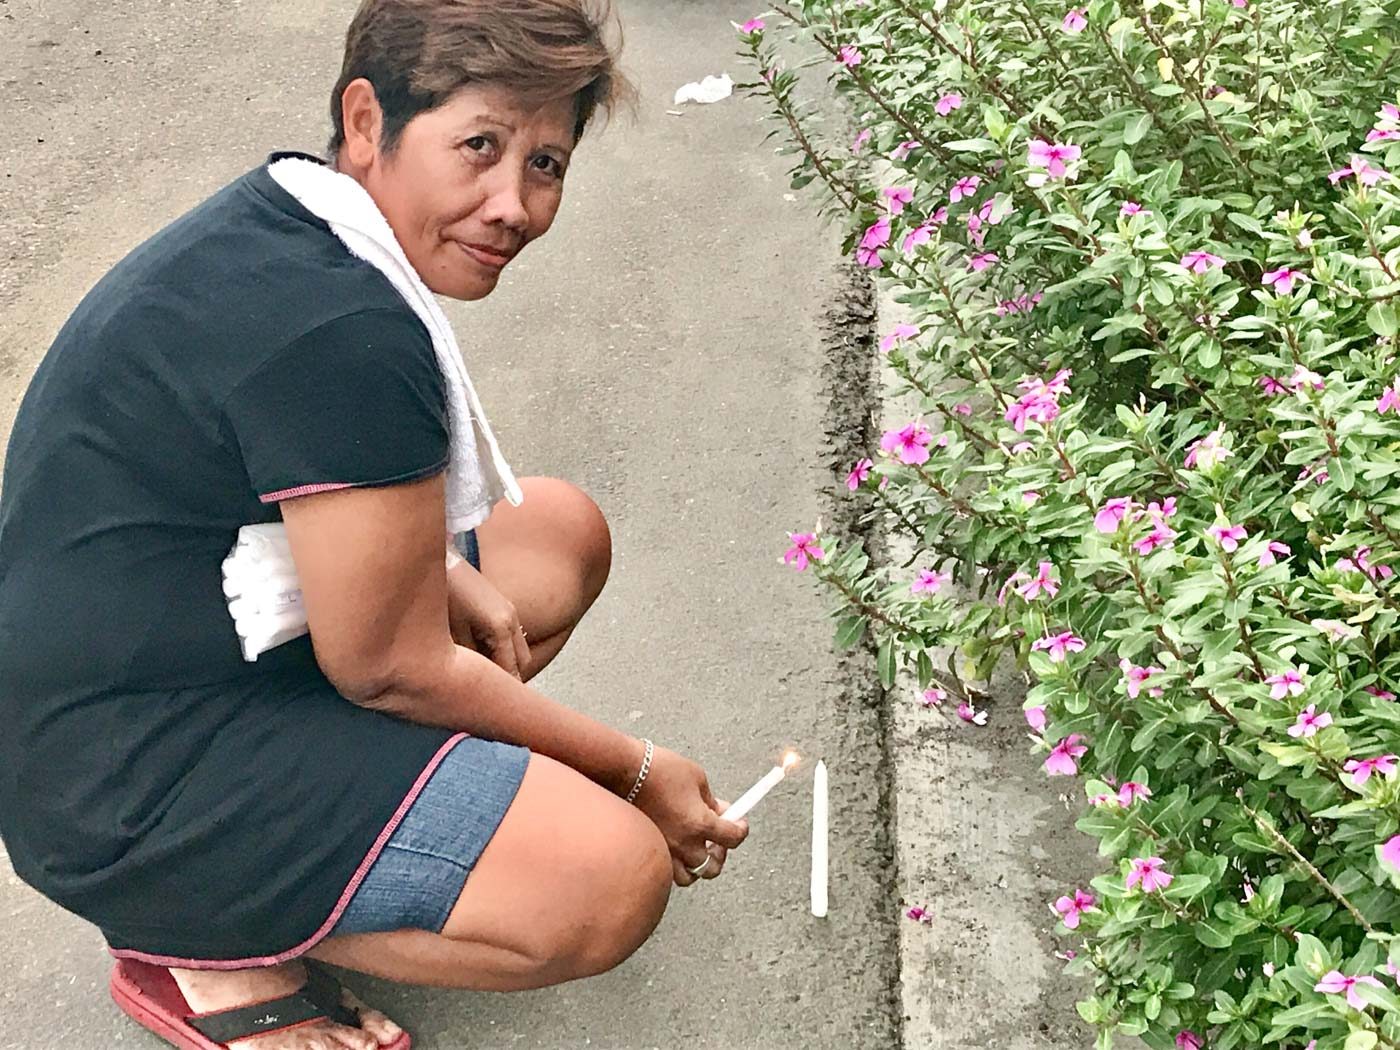 HOPE STILL REMAINS. Analyn Pajares, 43, is a resident of Barangay 88 San Jose. She lights a candle for her sibling who has yet to be found since Super Typhoon Yolanda. She has not lost hope that someday, her sibling will come home. Photo by Jene-Anne Pangue  